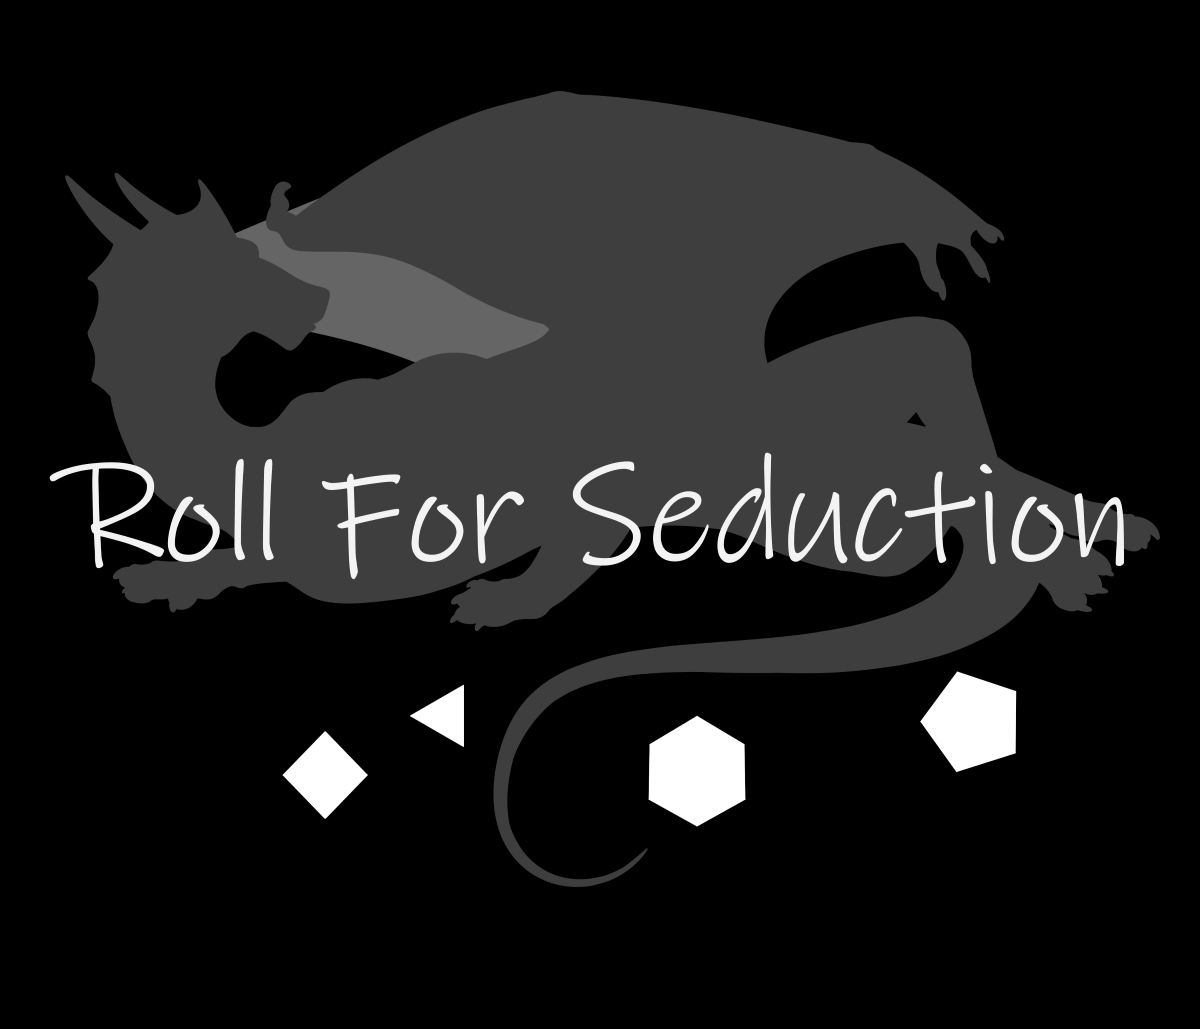 Roll for seduction